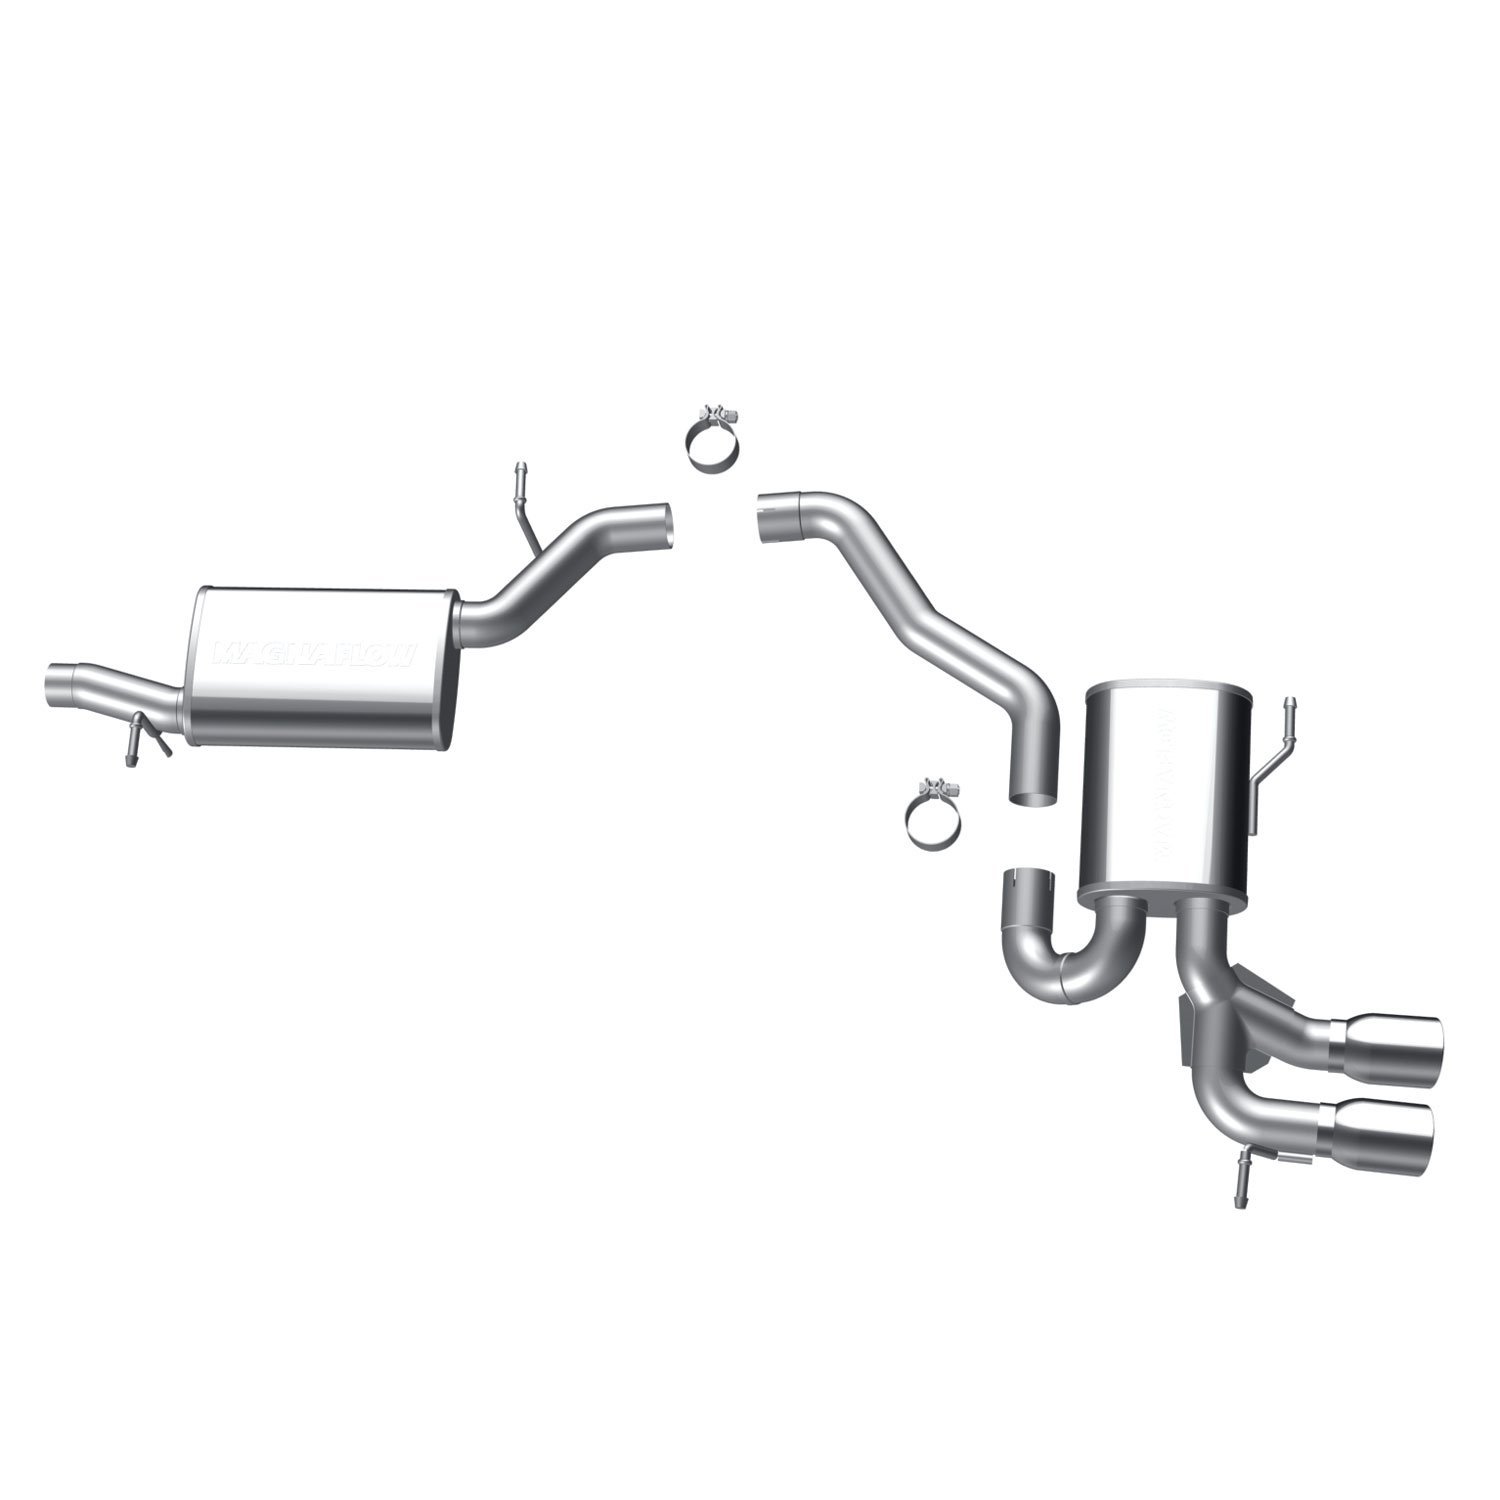 Touring Series Cat-Back Exhaust System 2006-09 Audi A3 Quattro 3.2L V6